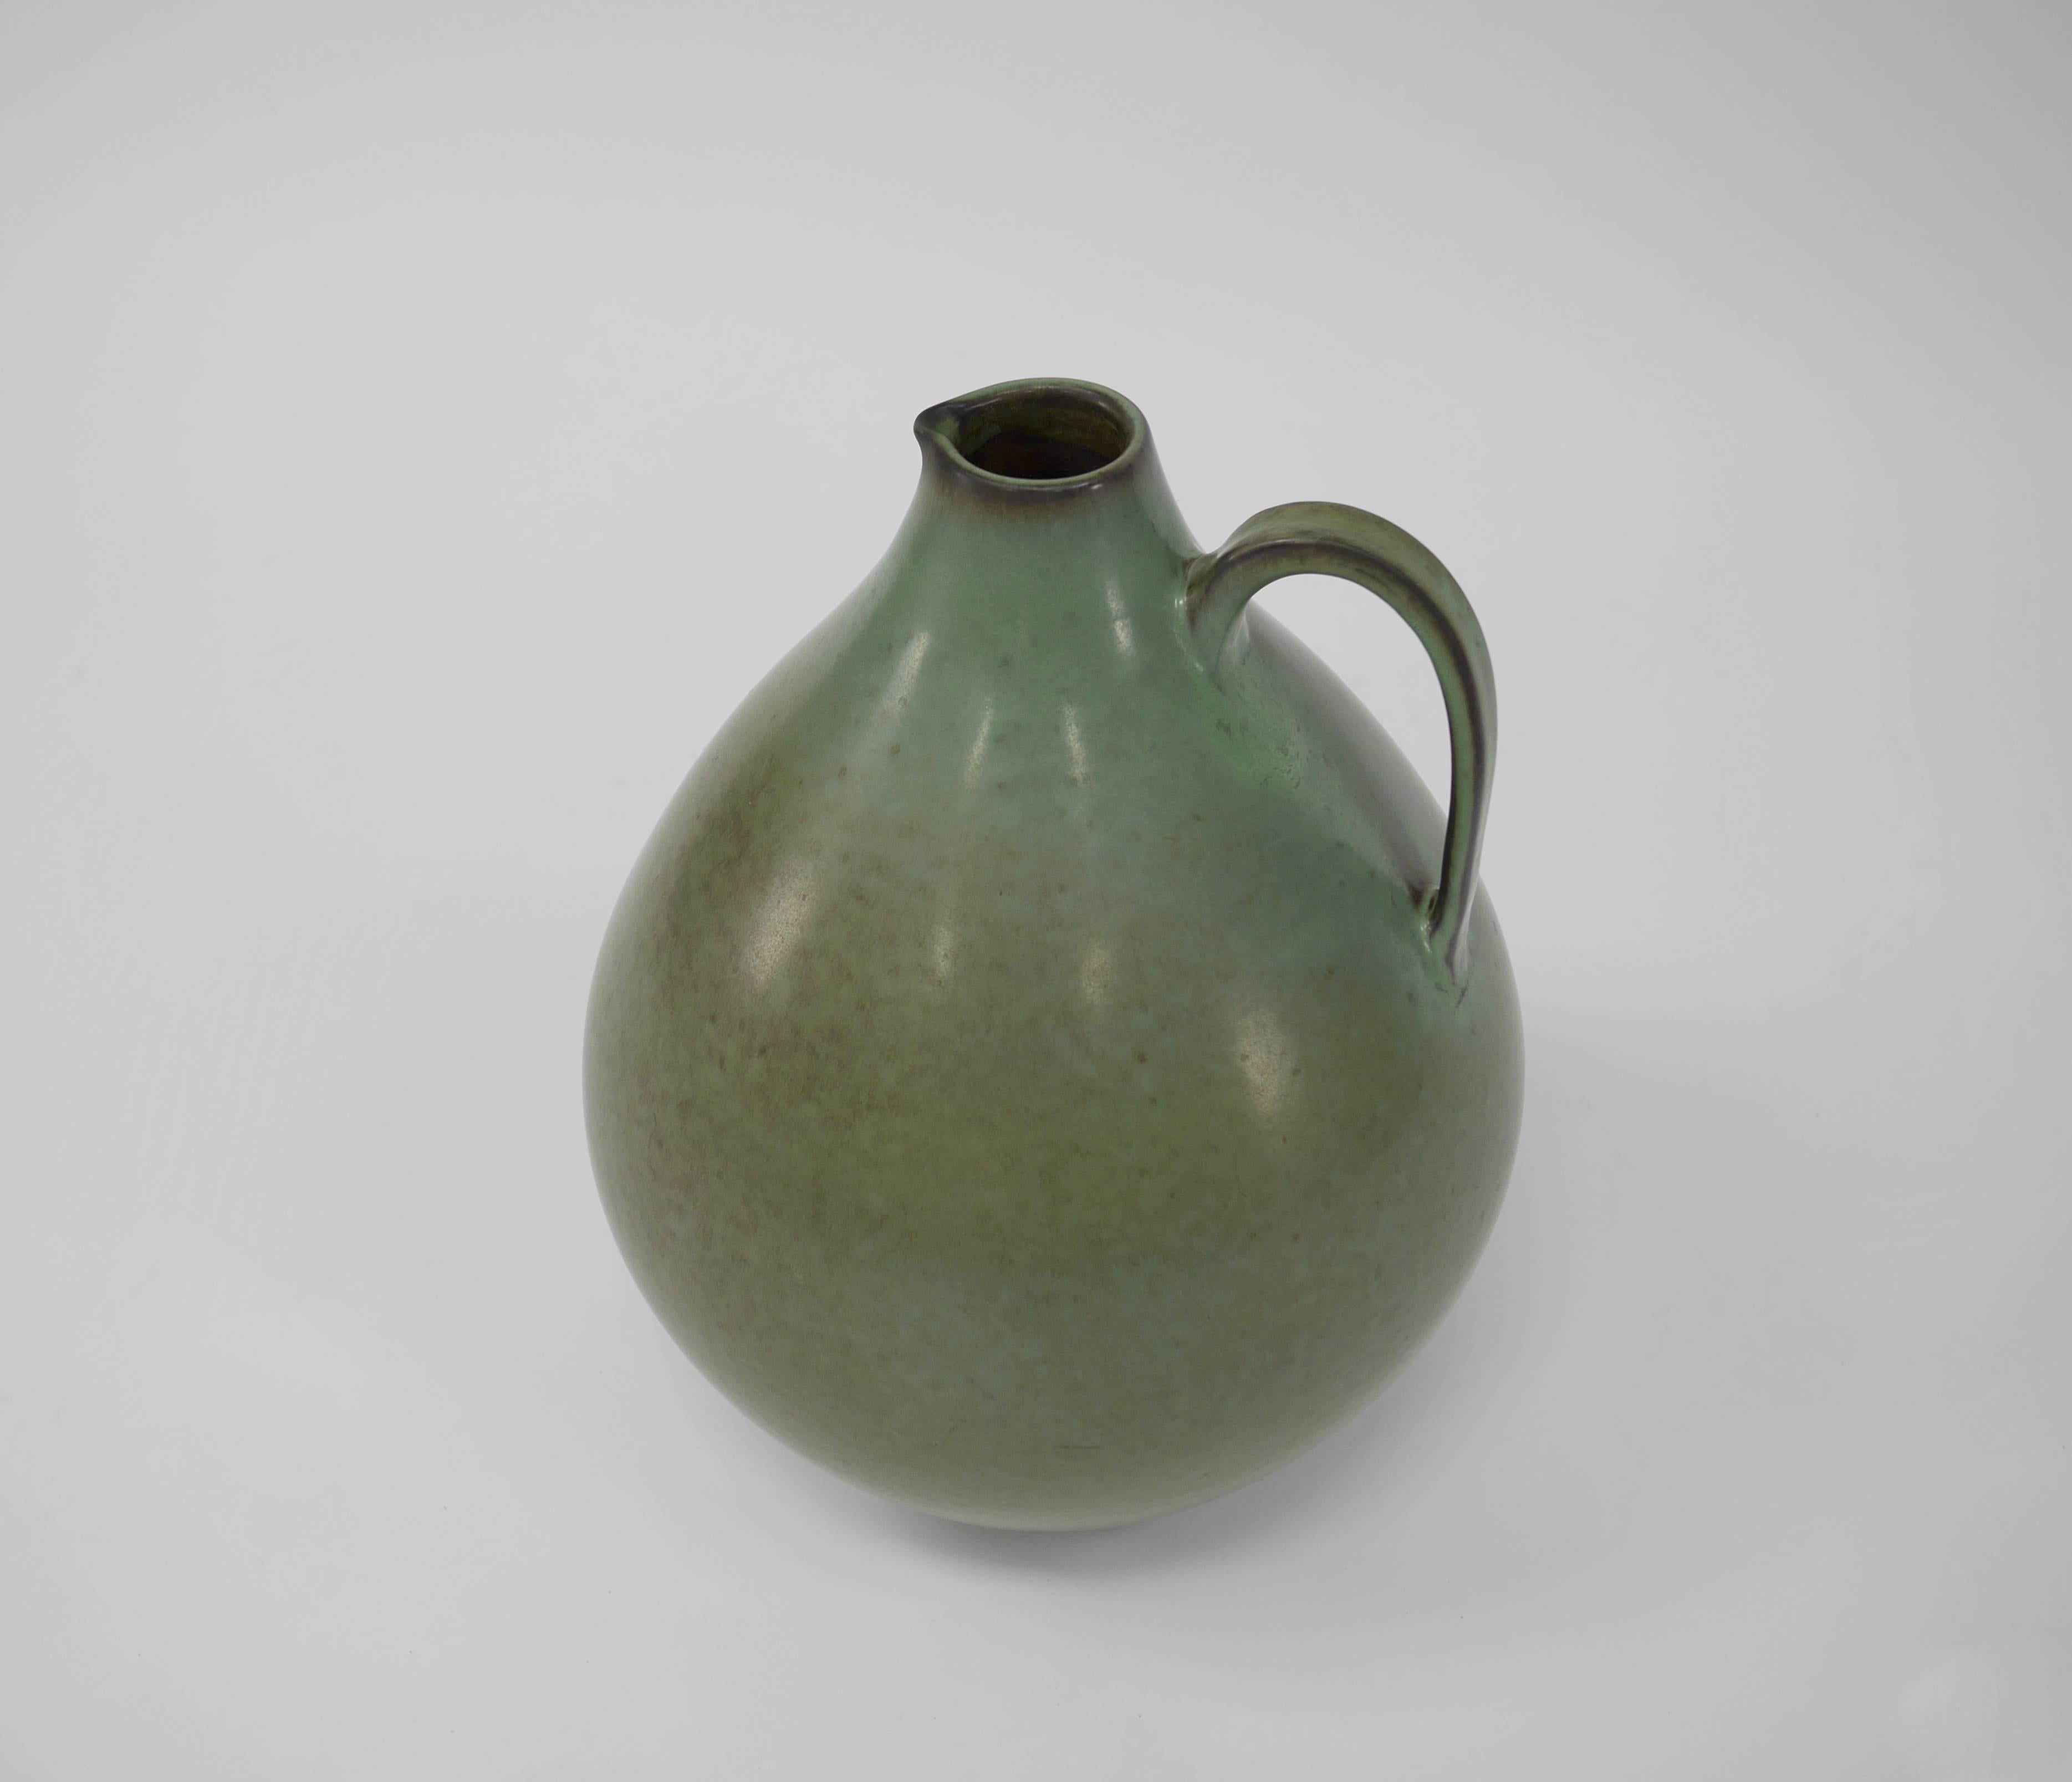 Very large, Ewer Green ceramic vessel, Danish Modern, mid-20th century by Knabstrup Pottery Fabric. Measures: 21